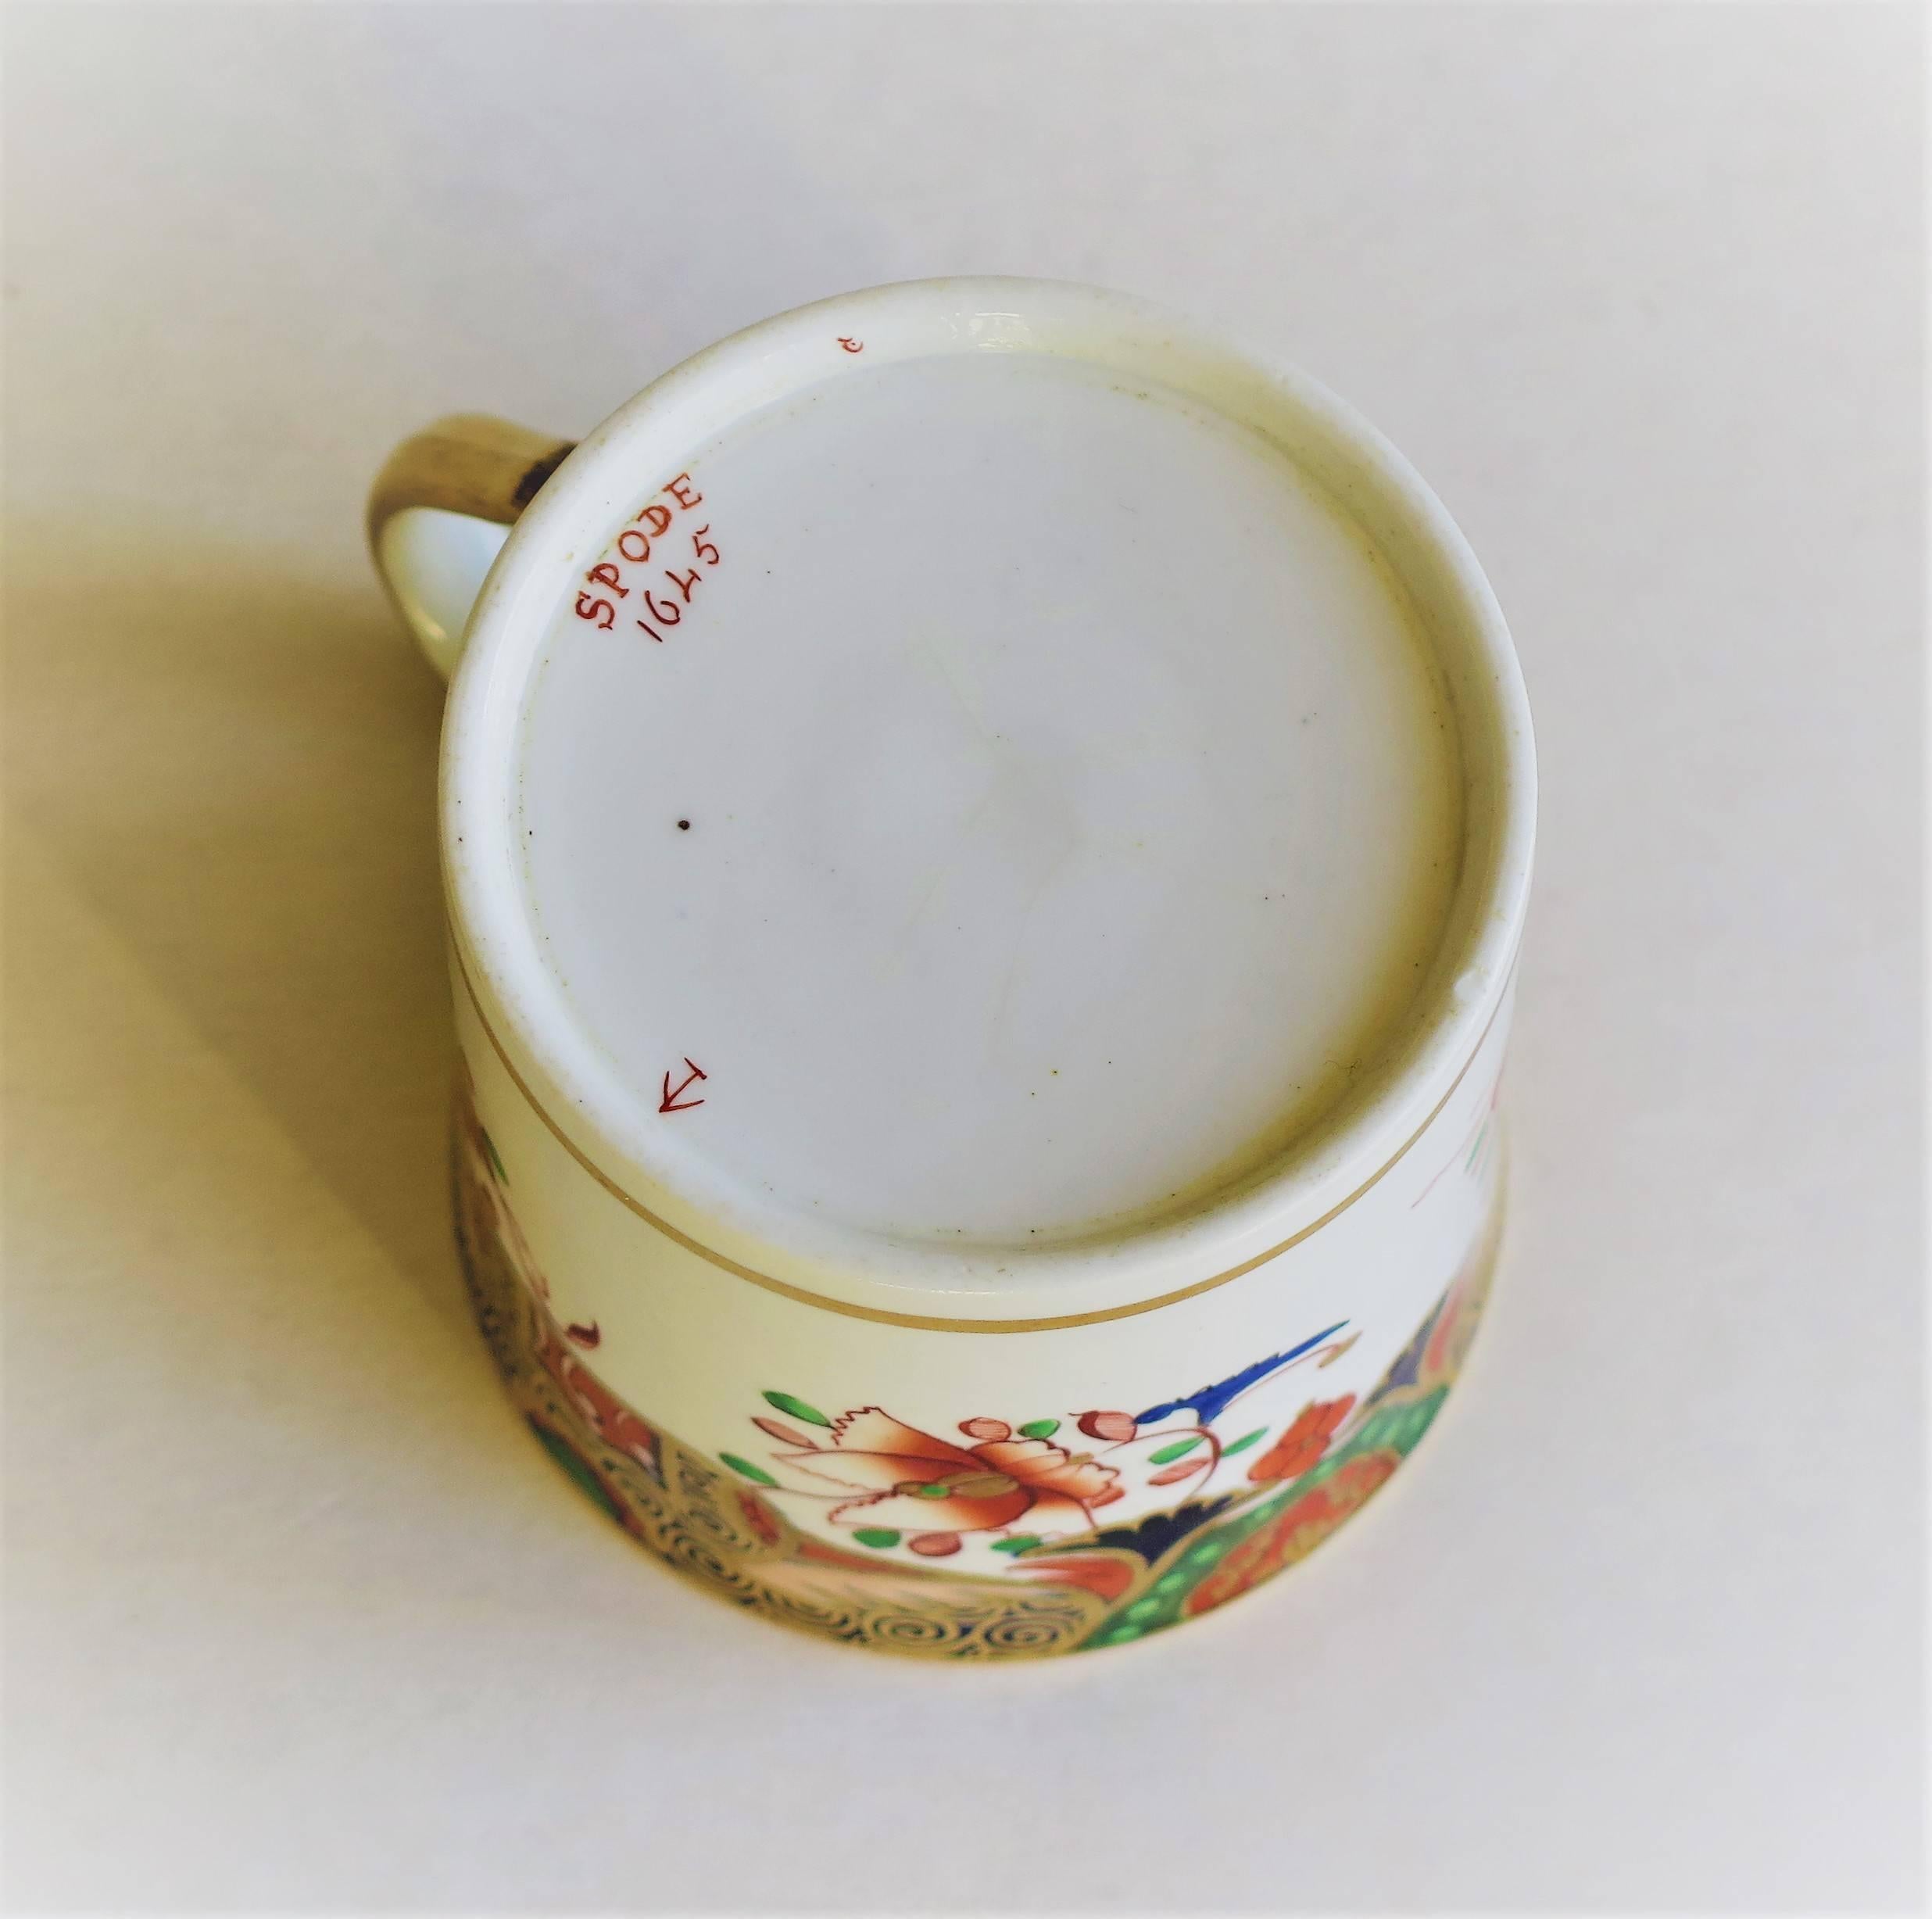 19th Century Spode Porcelain Coffee Can Pattern 1645 marked Spode to base, Circa 1810